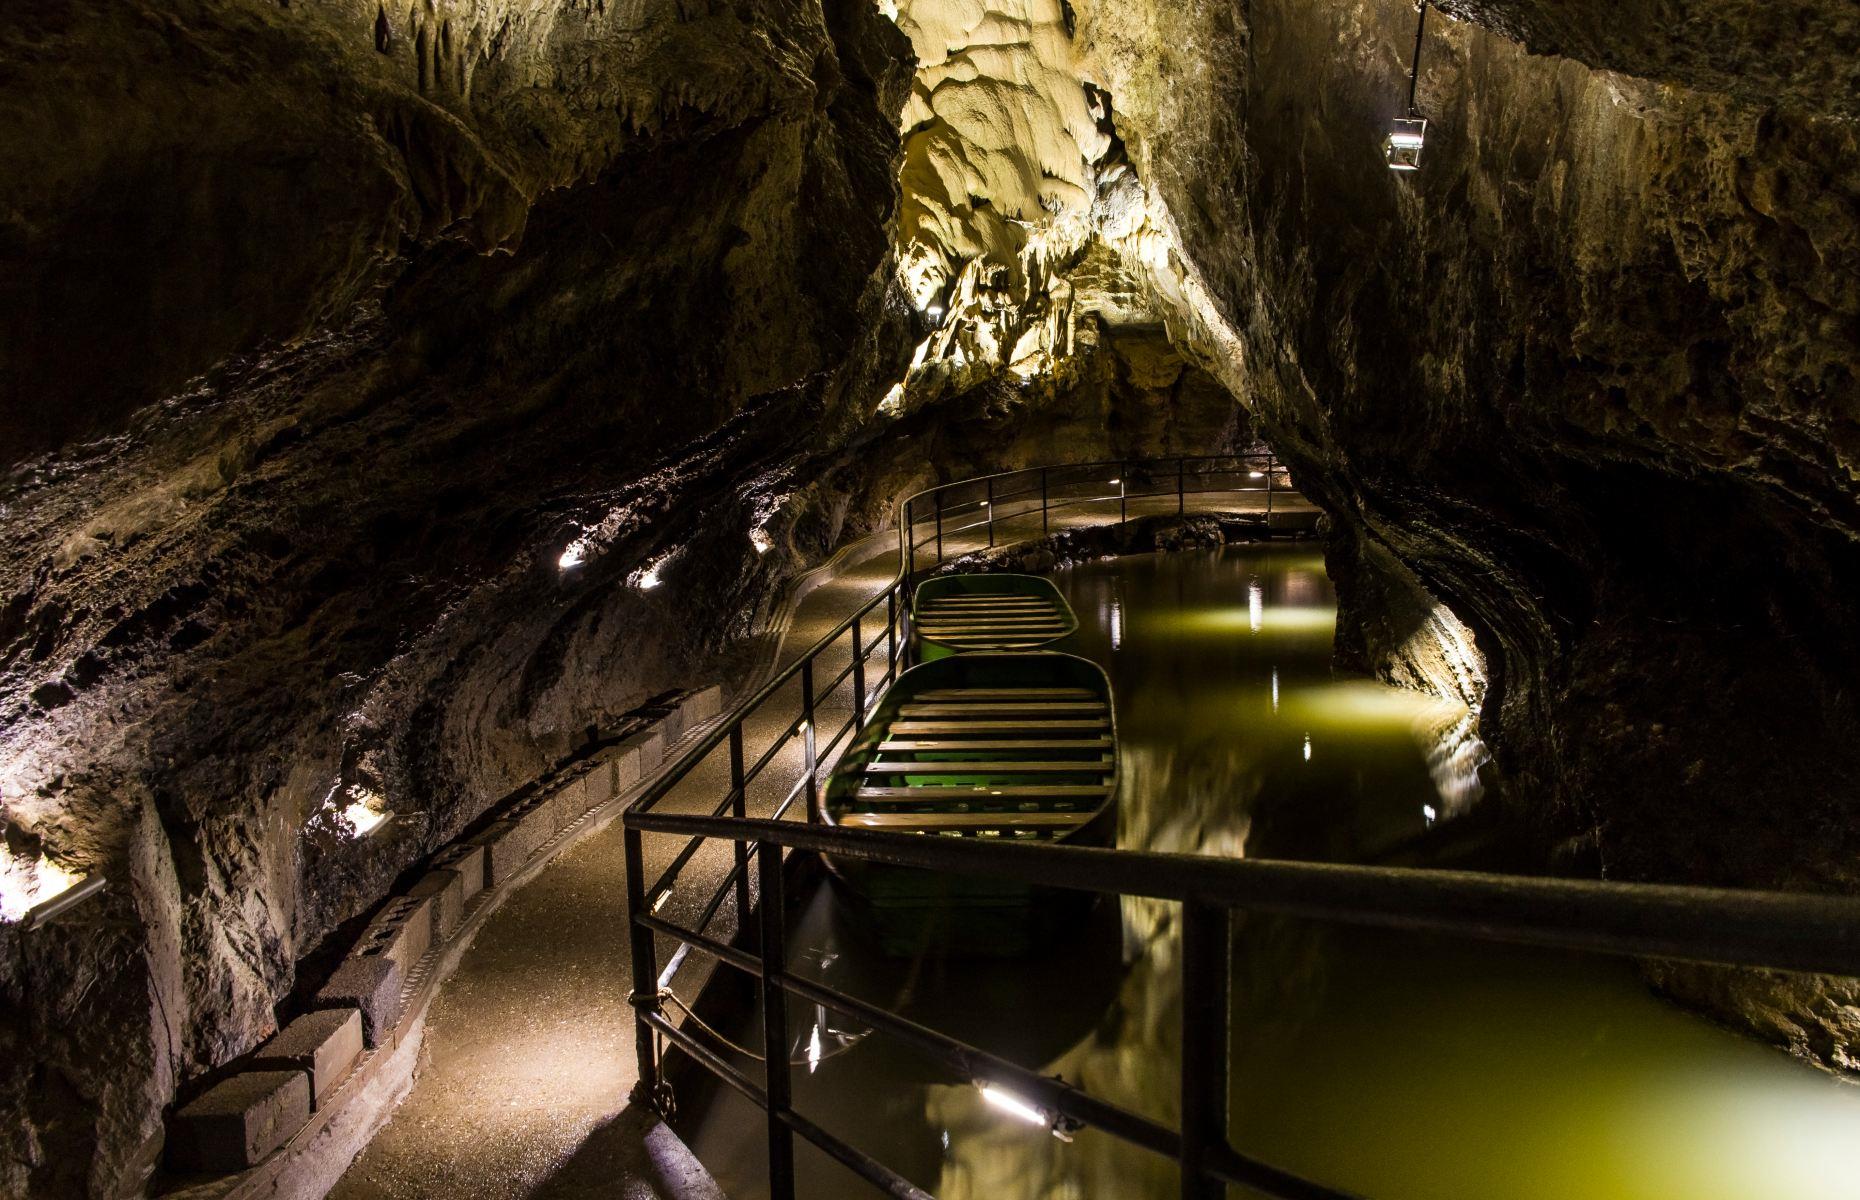 <p>Remouchamps in the province of Liège in Belgium is hiding an incredible secret. This is where you'll find the world's longest subterranean river. After a half-a-mile (0.8km) walk exploring the passageways and cathedral cavern, you'll hop in a rowboat for a peaceful trip along the water. The caves were used in the Second World War as a shelter.</p>